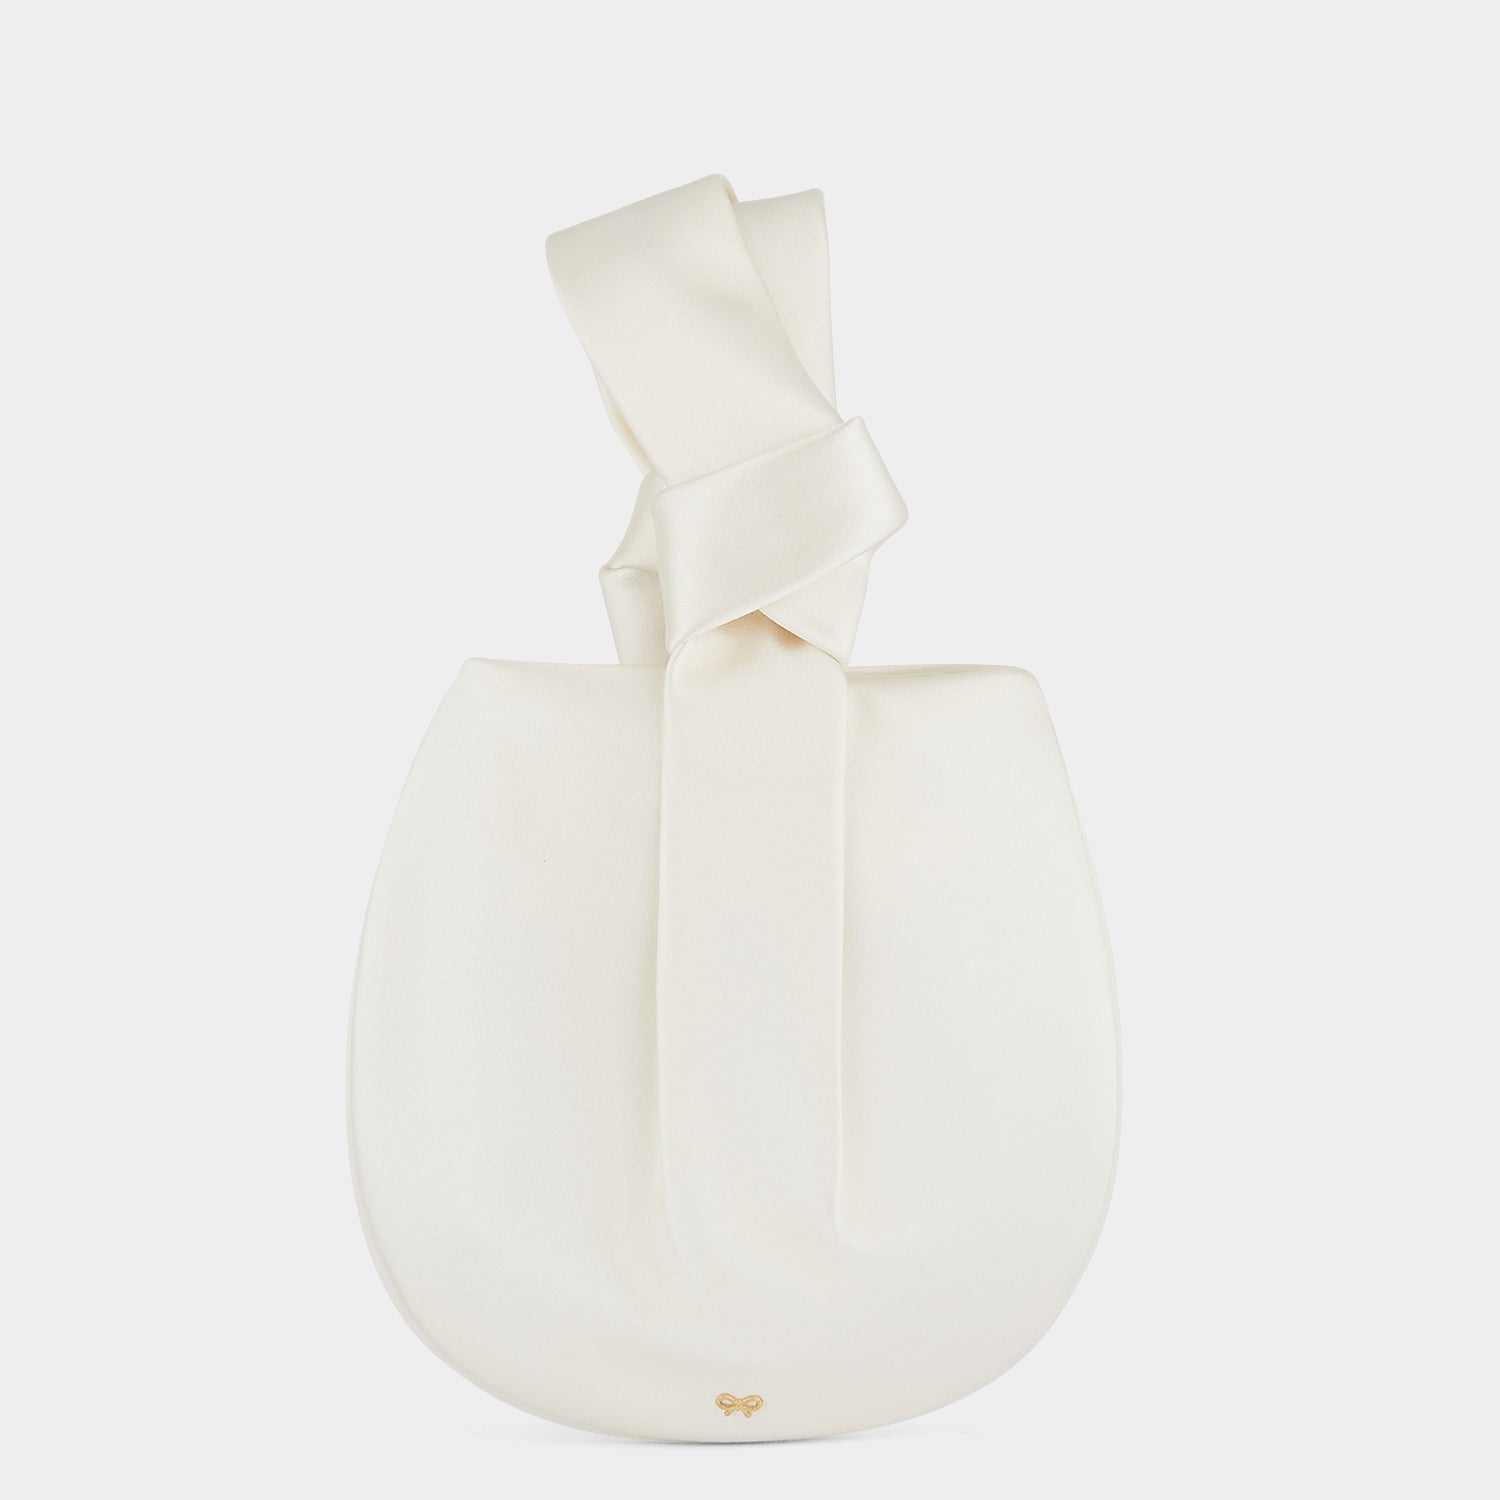 Tie the Knot Clutch -

                  
                    Double Satin in Ivory -
                  

                  Anya Hindmarch EU
